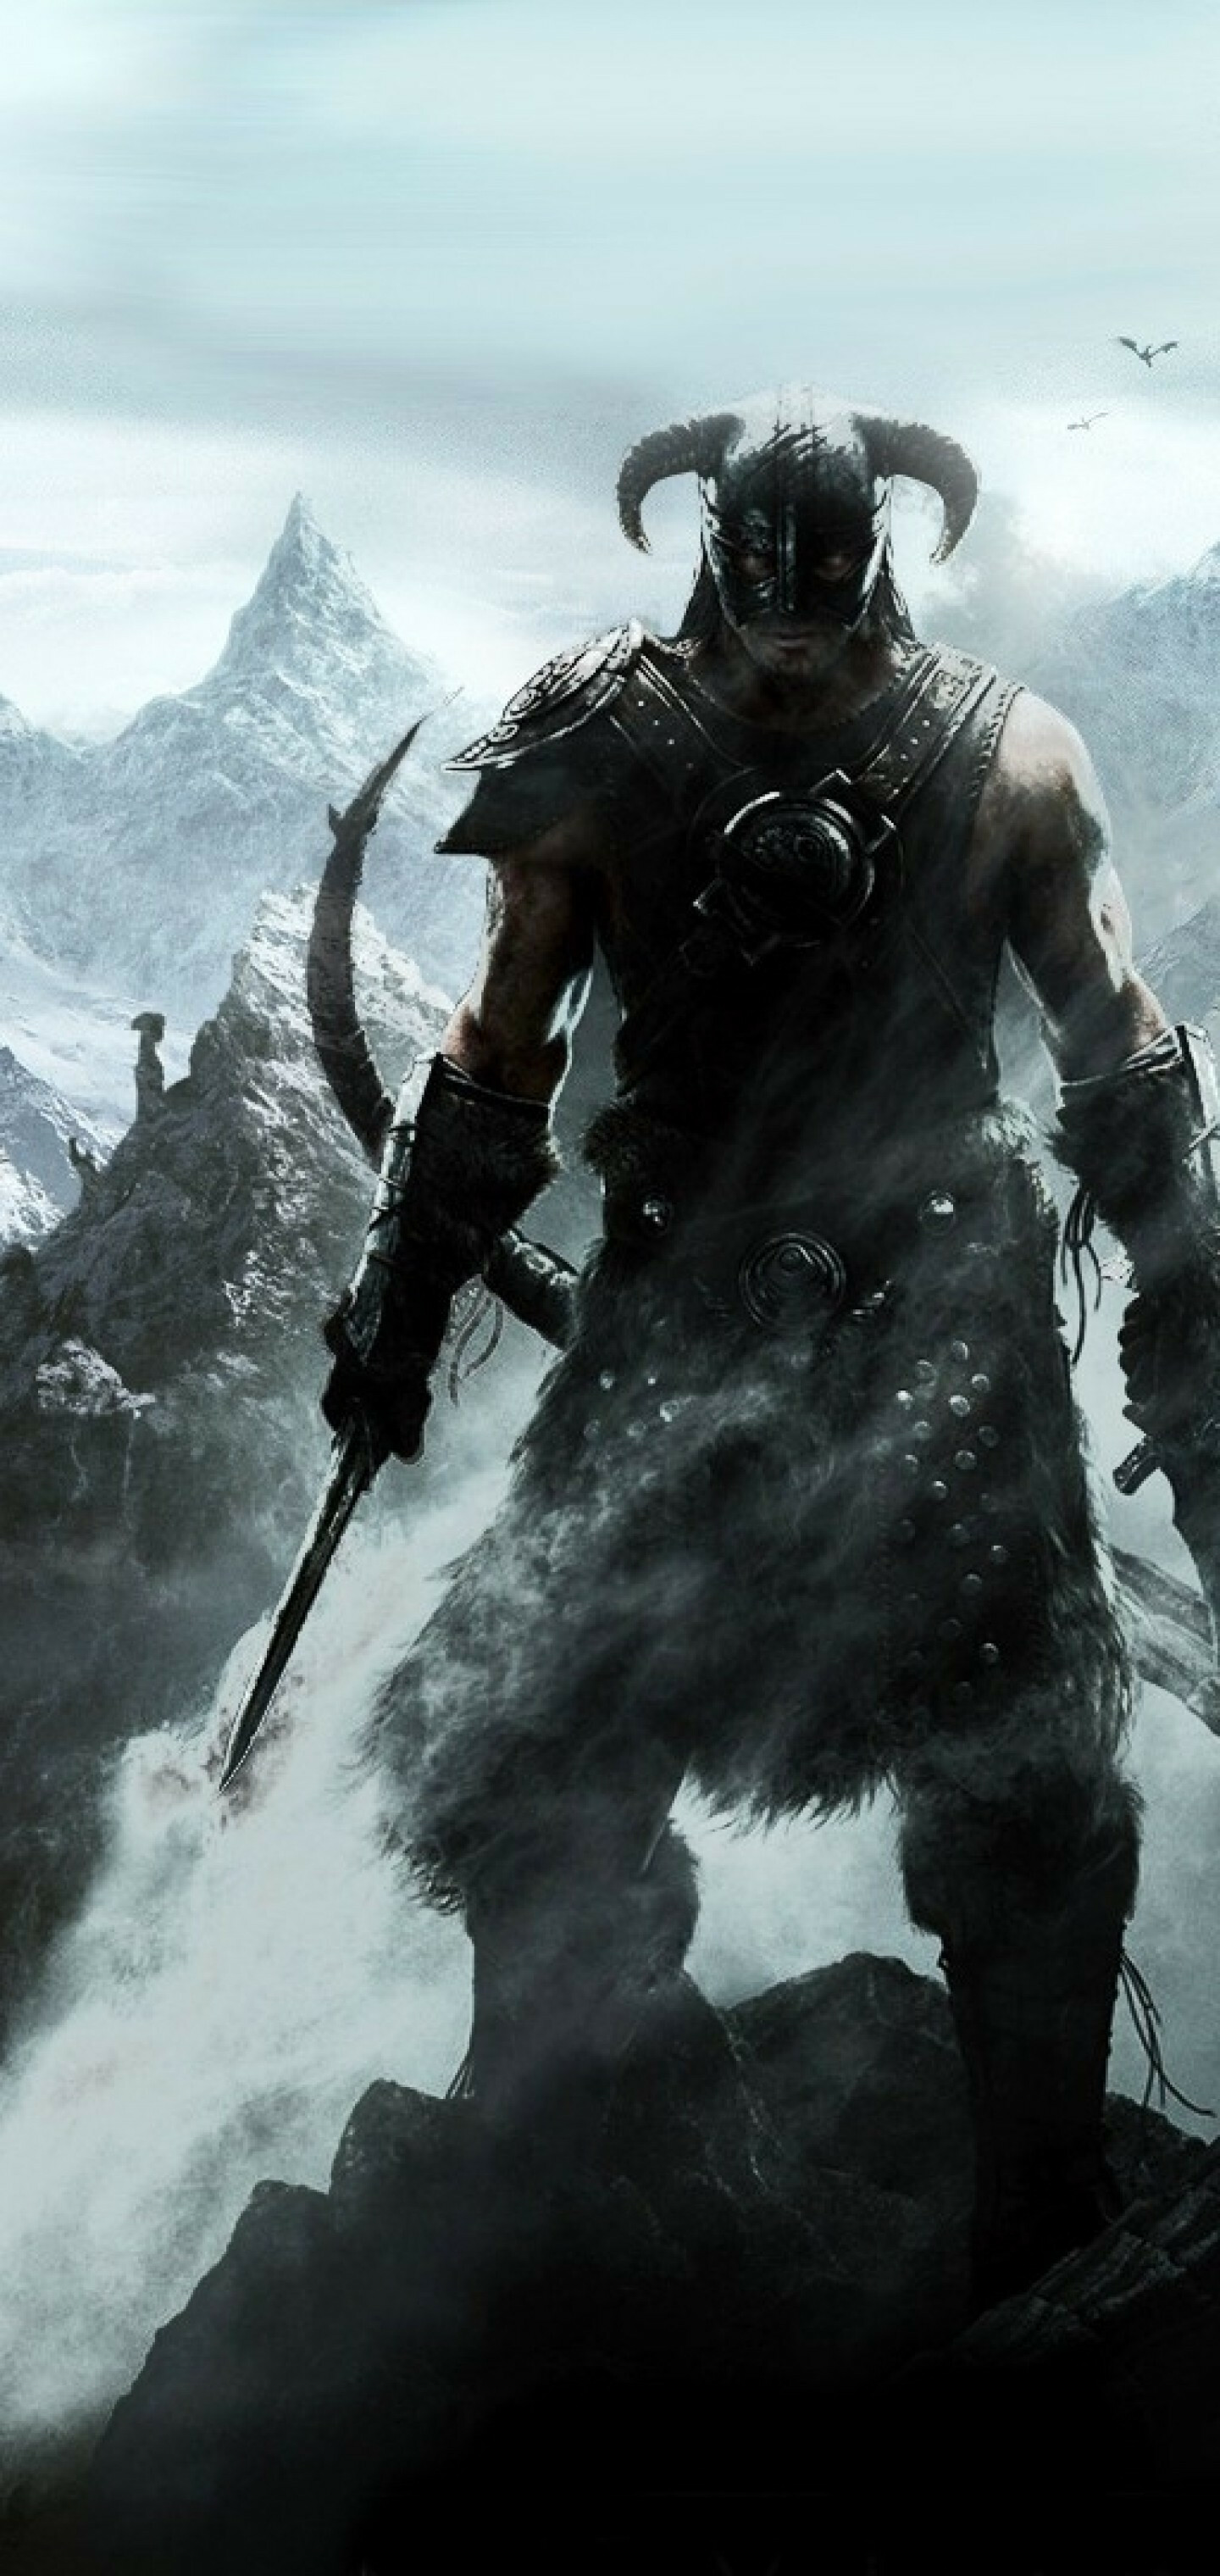 Skyrim: A single-player role-playing video game developed by Bethesda Game Studios. 1440x3040 HD Wallpaper.